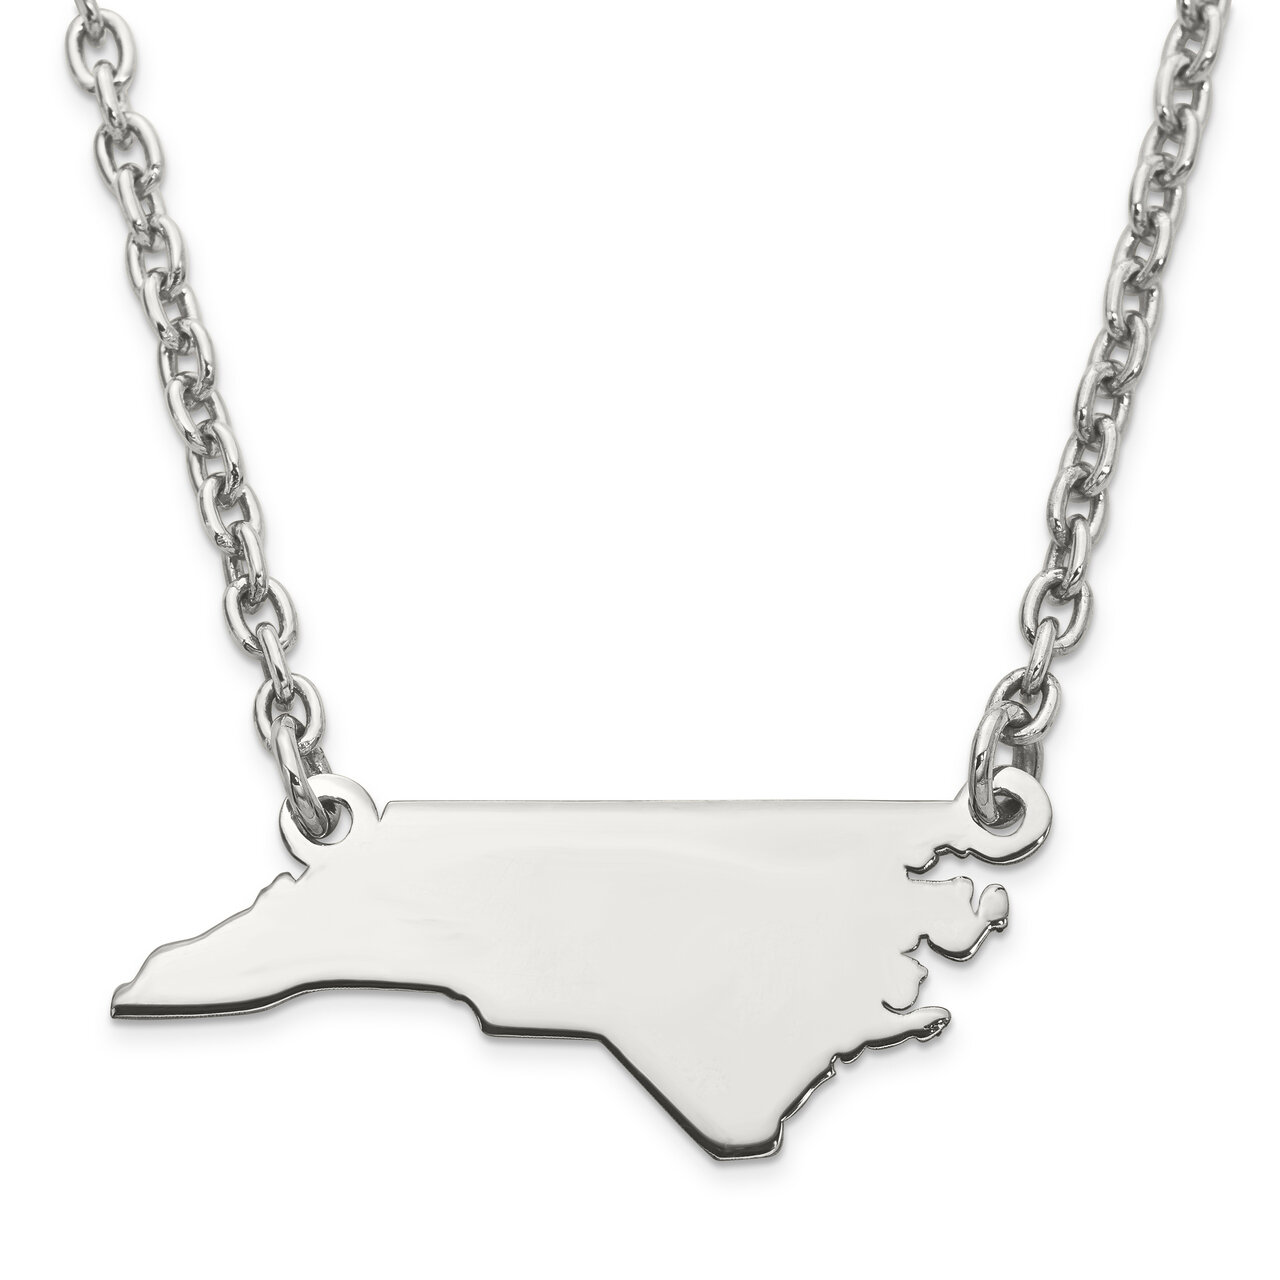 North Carolina State Pendant Necklace with Chain 14k White Gold Engravable XNA706W-NC